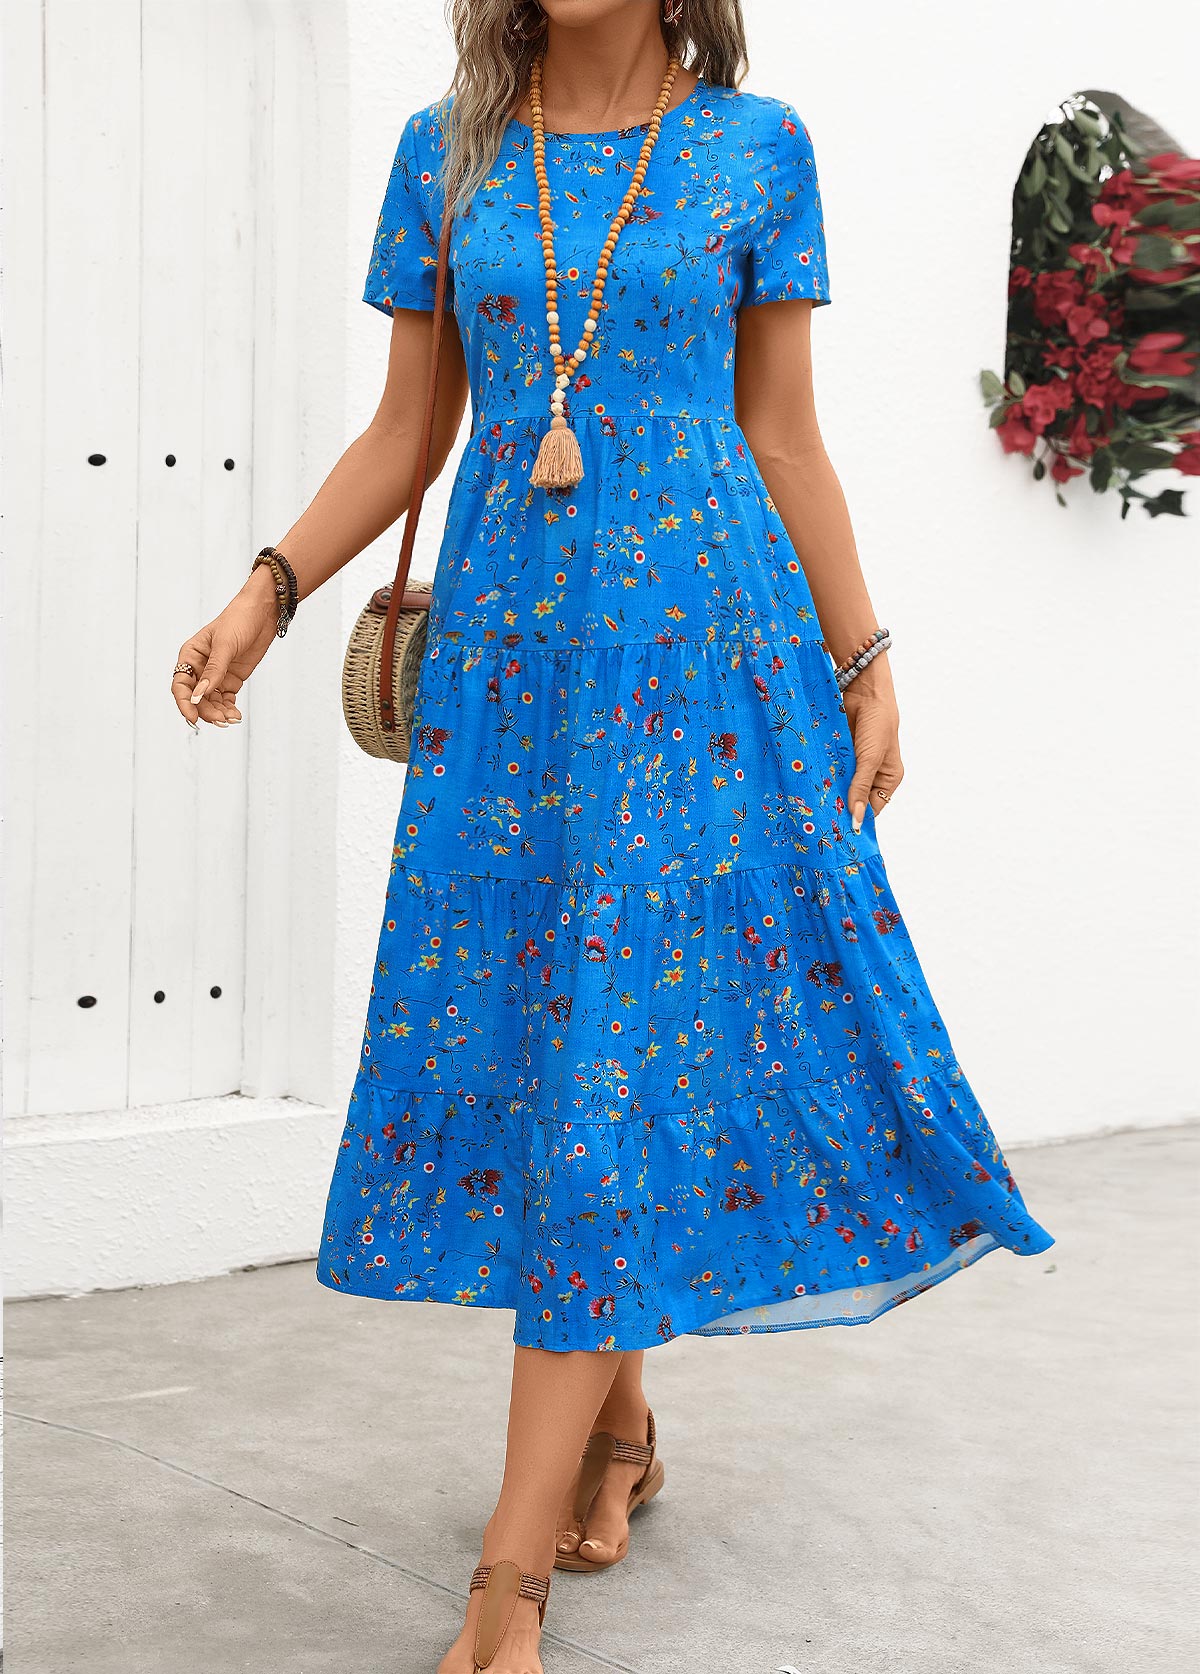 Sky Blue Ruched Ditsy Floral Print Short Sleeve Dress